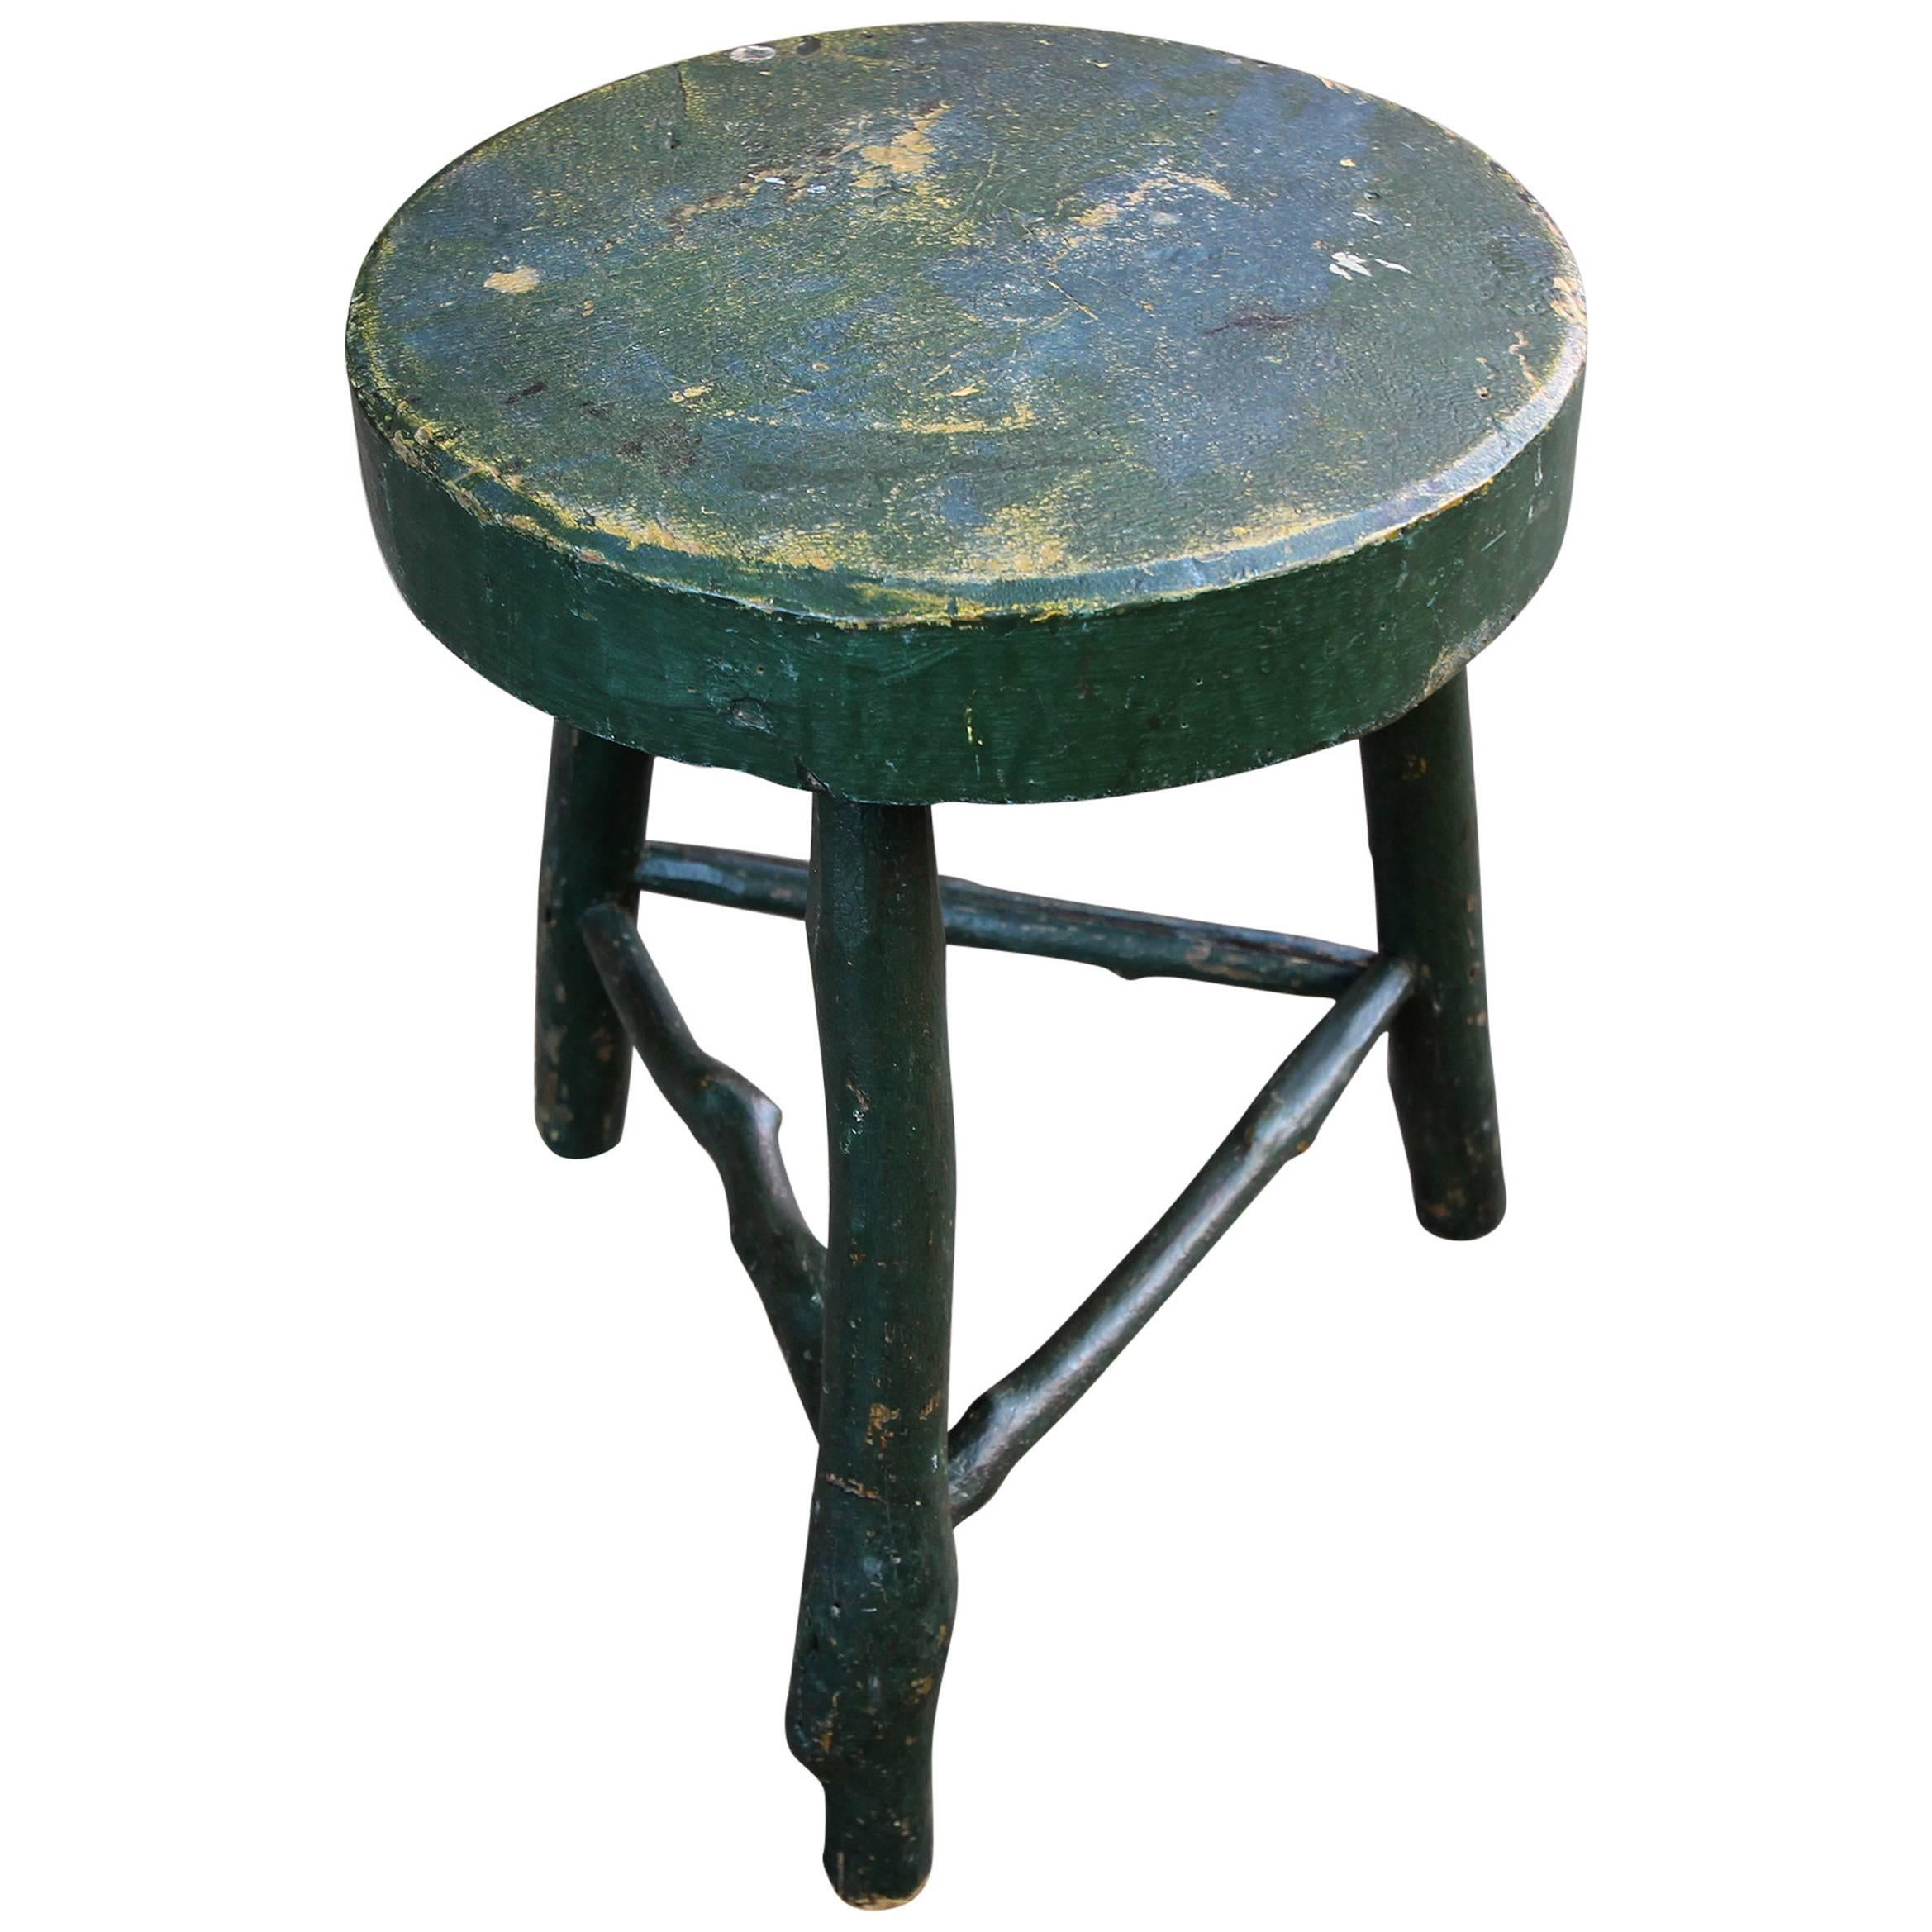 Carved and Painted Tripod Stool with Twig Base, American, Late 19th Century For Sale